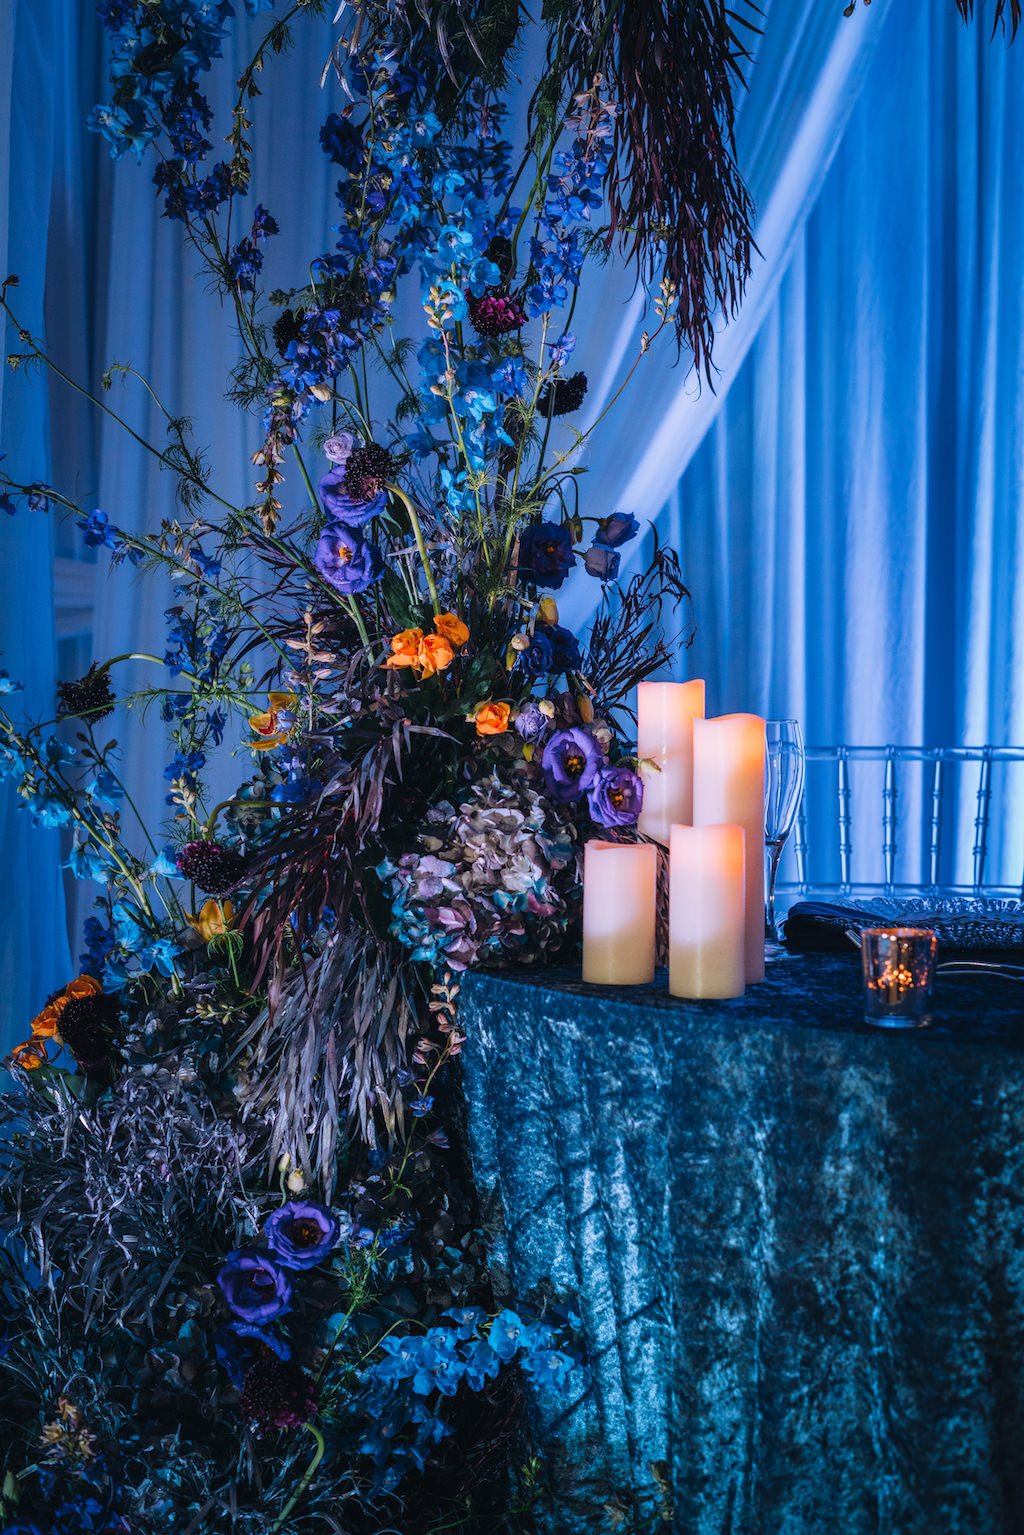 Creative Modern Contemporary Dark and Dramatic Wedding Reception Decor, Sweetheart Table with Blue Linen, Candlesticks, Linen Drapery Backdrop and Blue Uplighting, Unique Blue, Purple, Orange, Dark Purple, Floral Arrangement | Tampa Bay Wedding Planner Special Moments Event Planning | Wedding Rentals Gabro Event Services | Styled Shoot